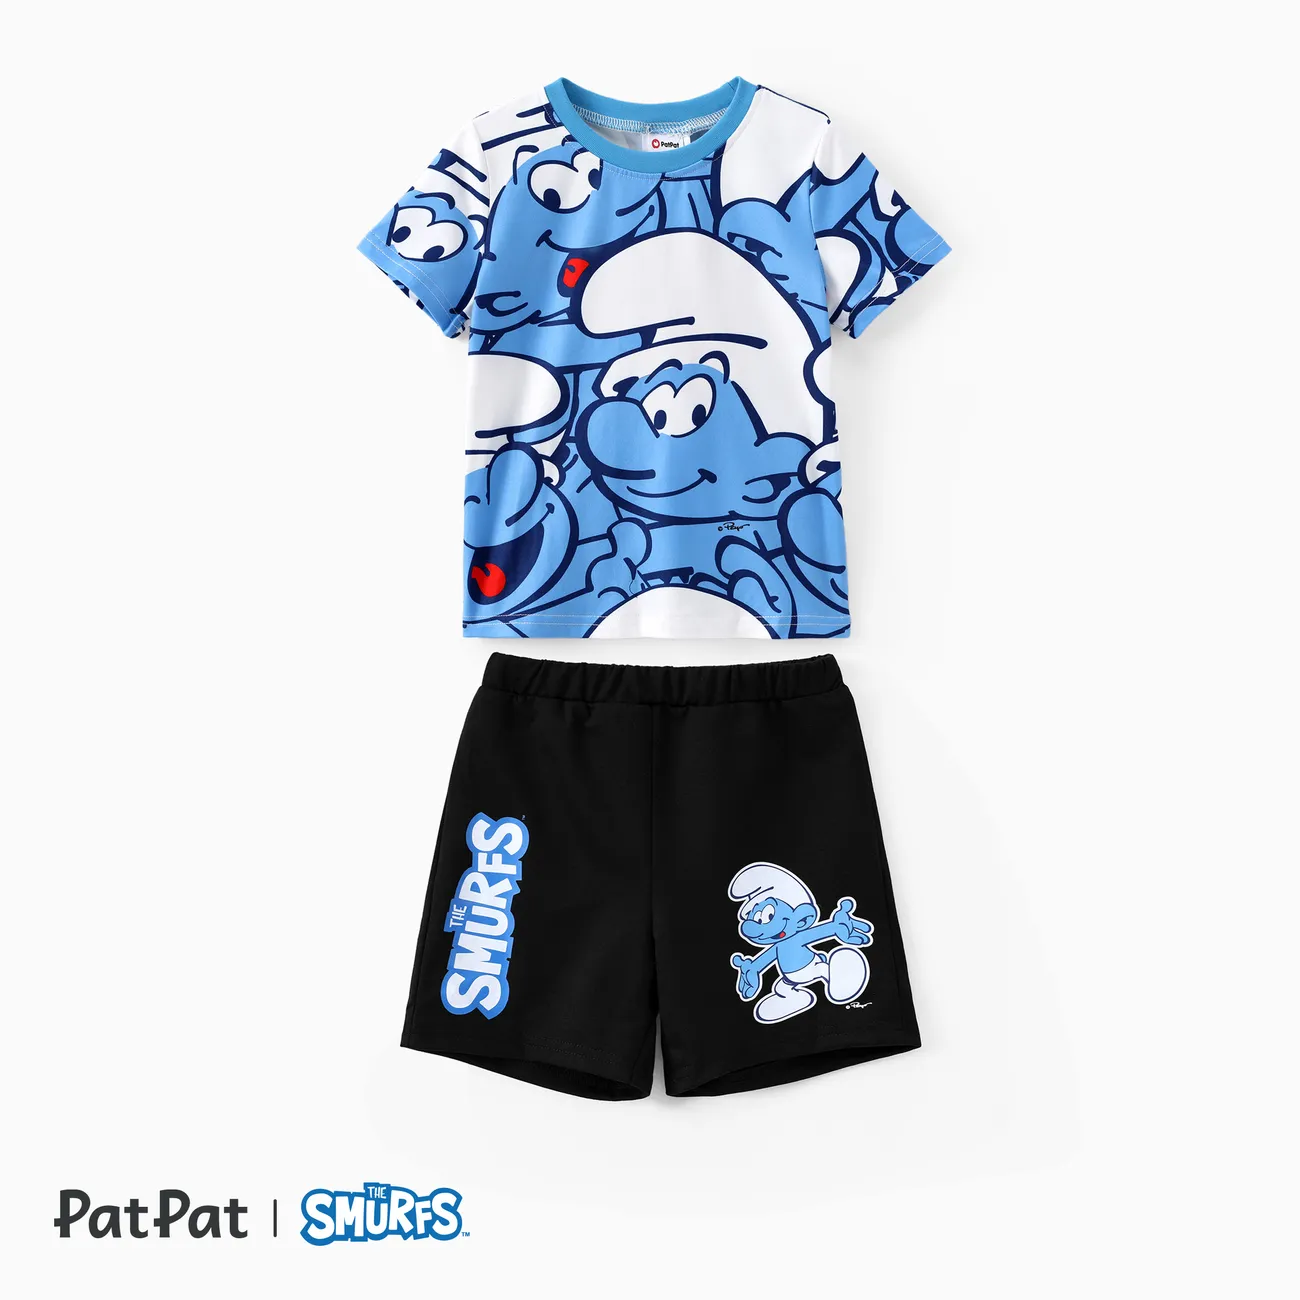 The Smurfs Toddler Boys 2pcs Character Print Tee with Shorts Set Blue big image 1